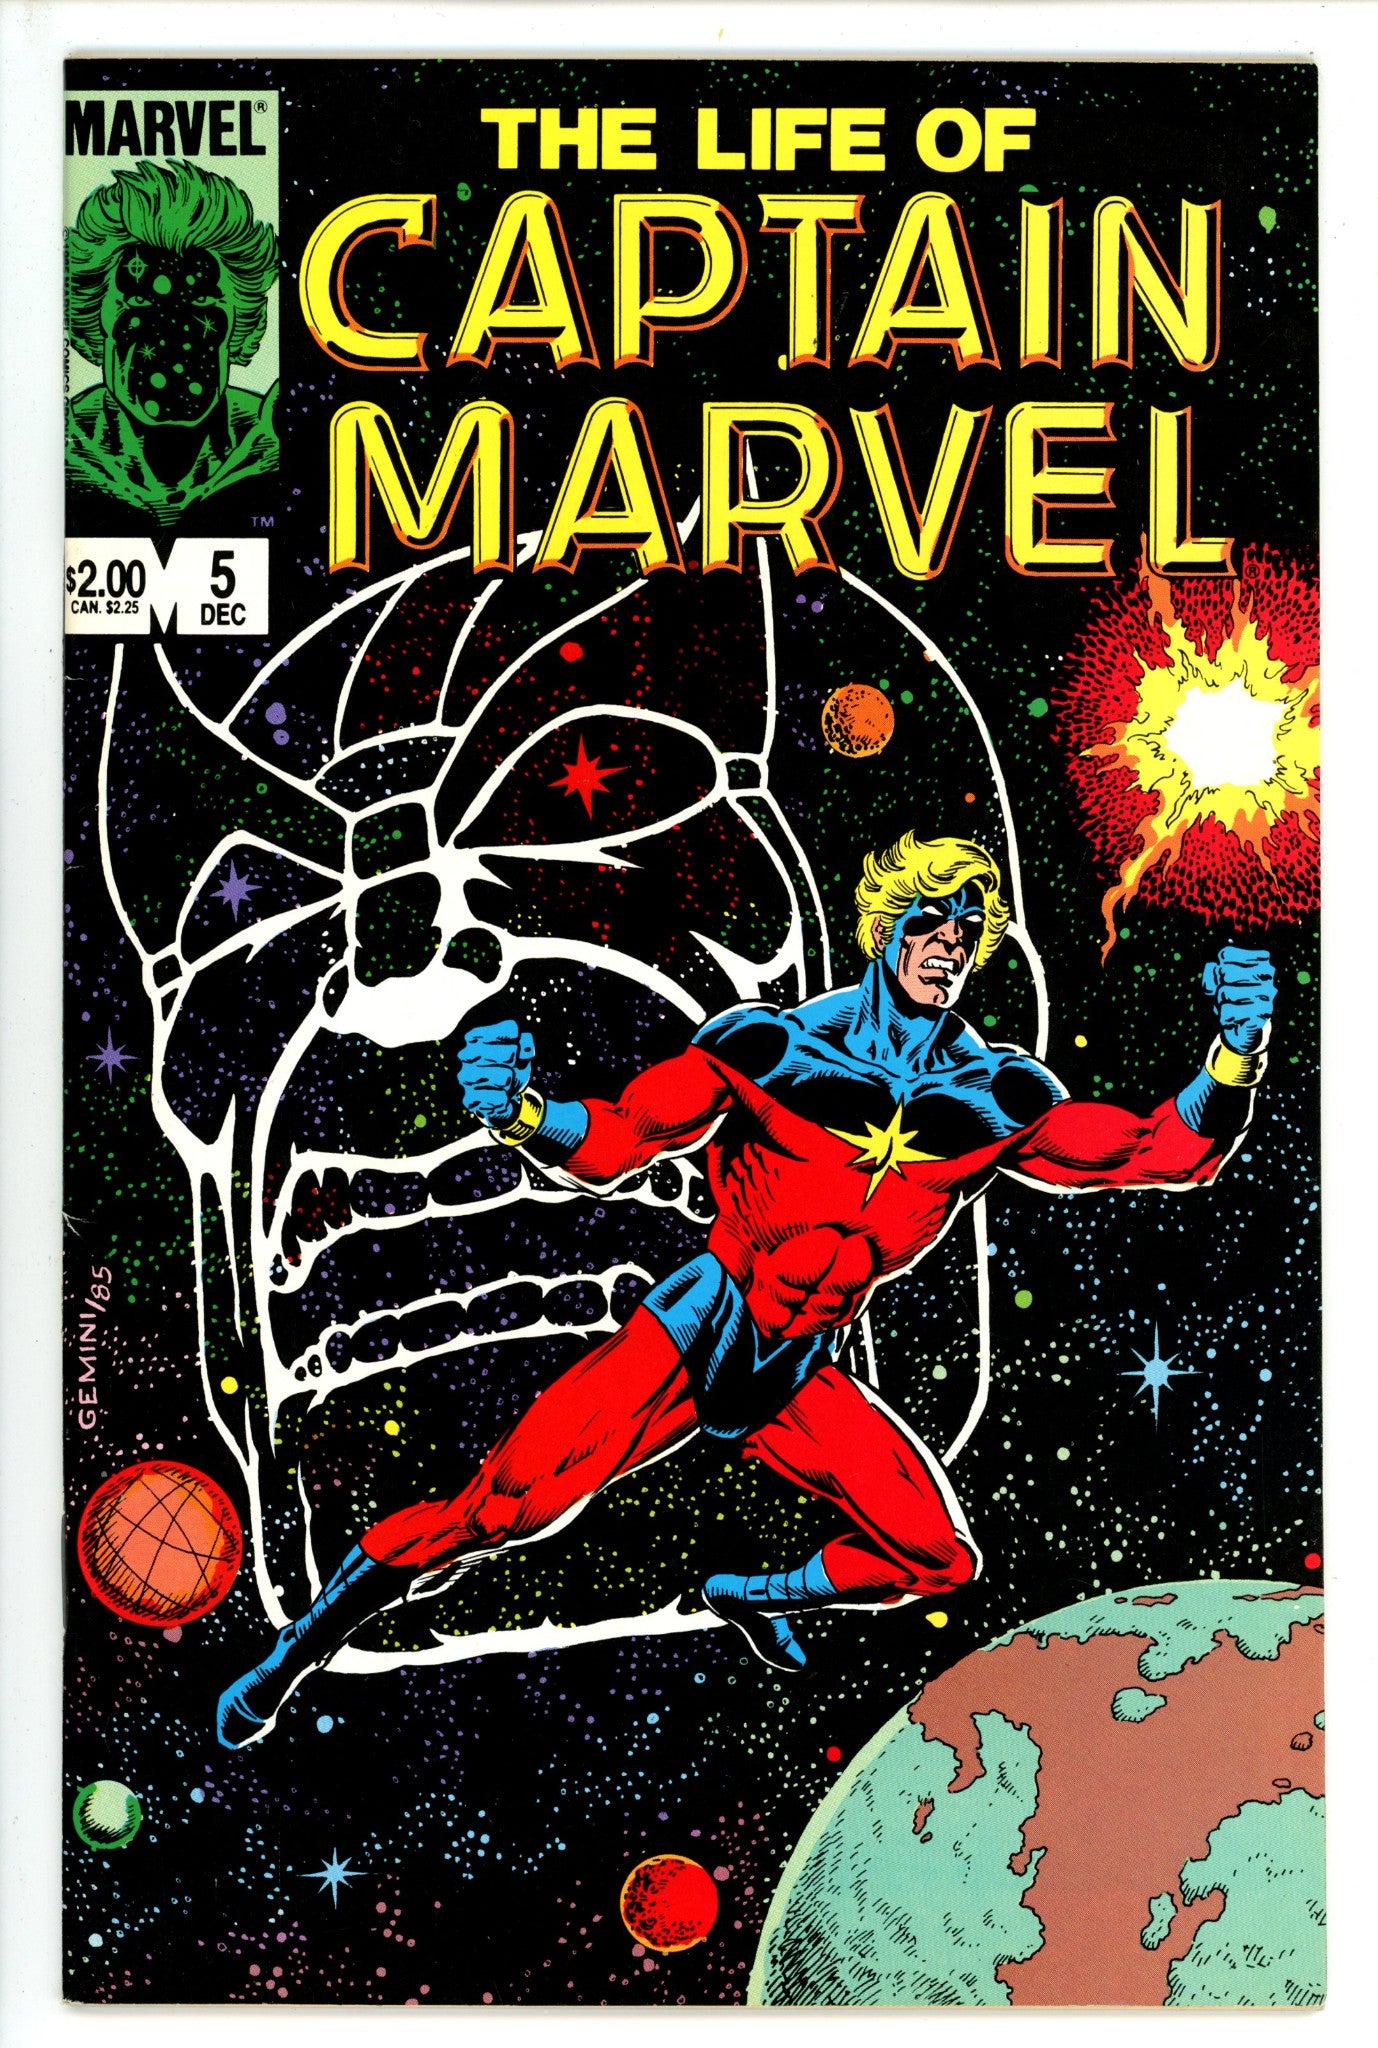 The Life of Captain Marvel 5 (1985)